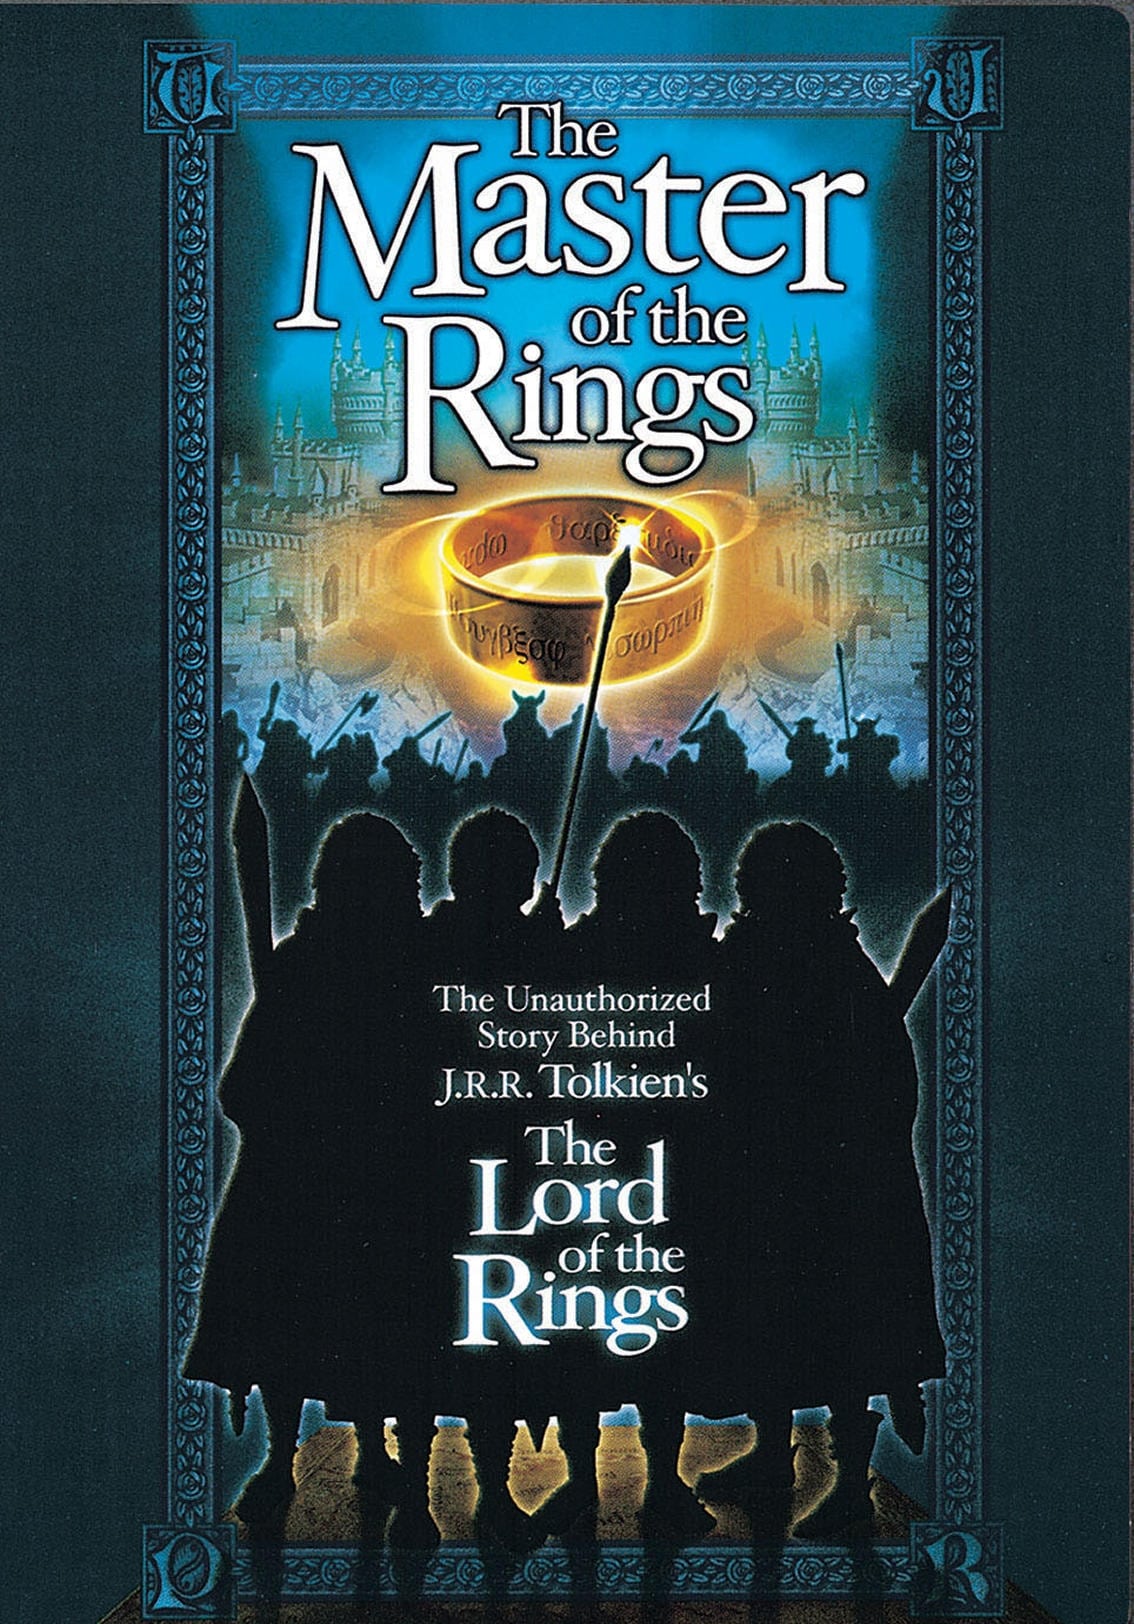 Master of the Rings: The Unauthorized Story Behind J.R.R. Tolkien's "Lord of the Rings"